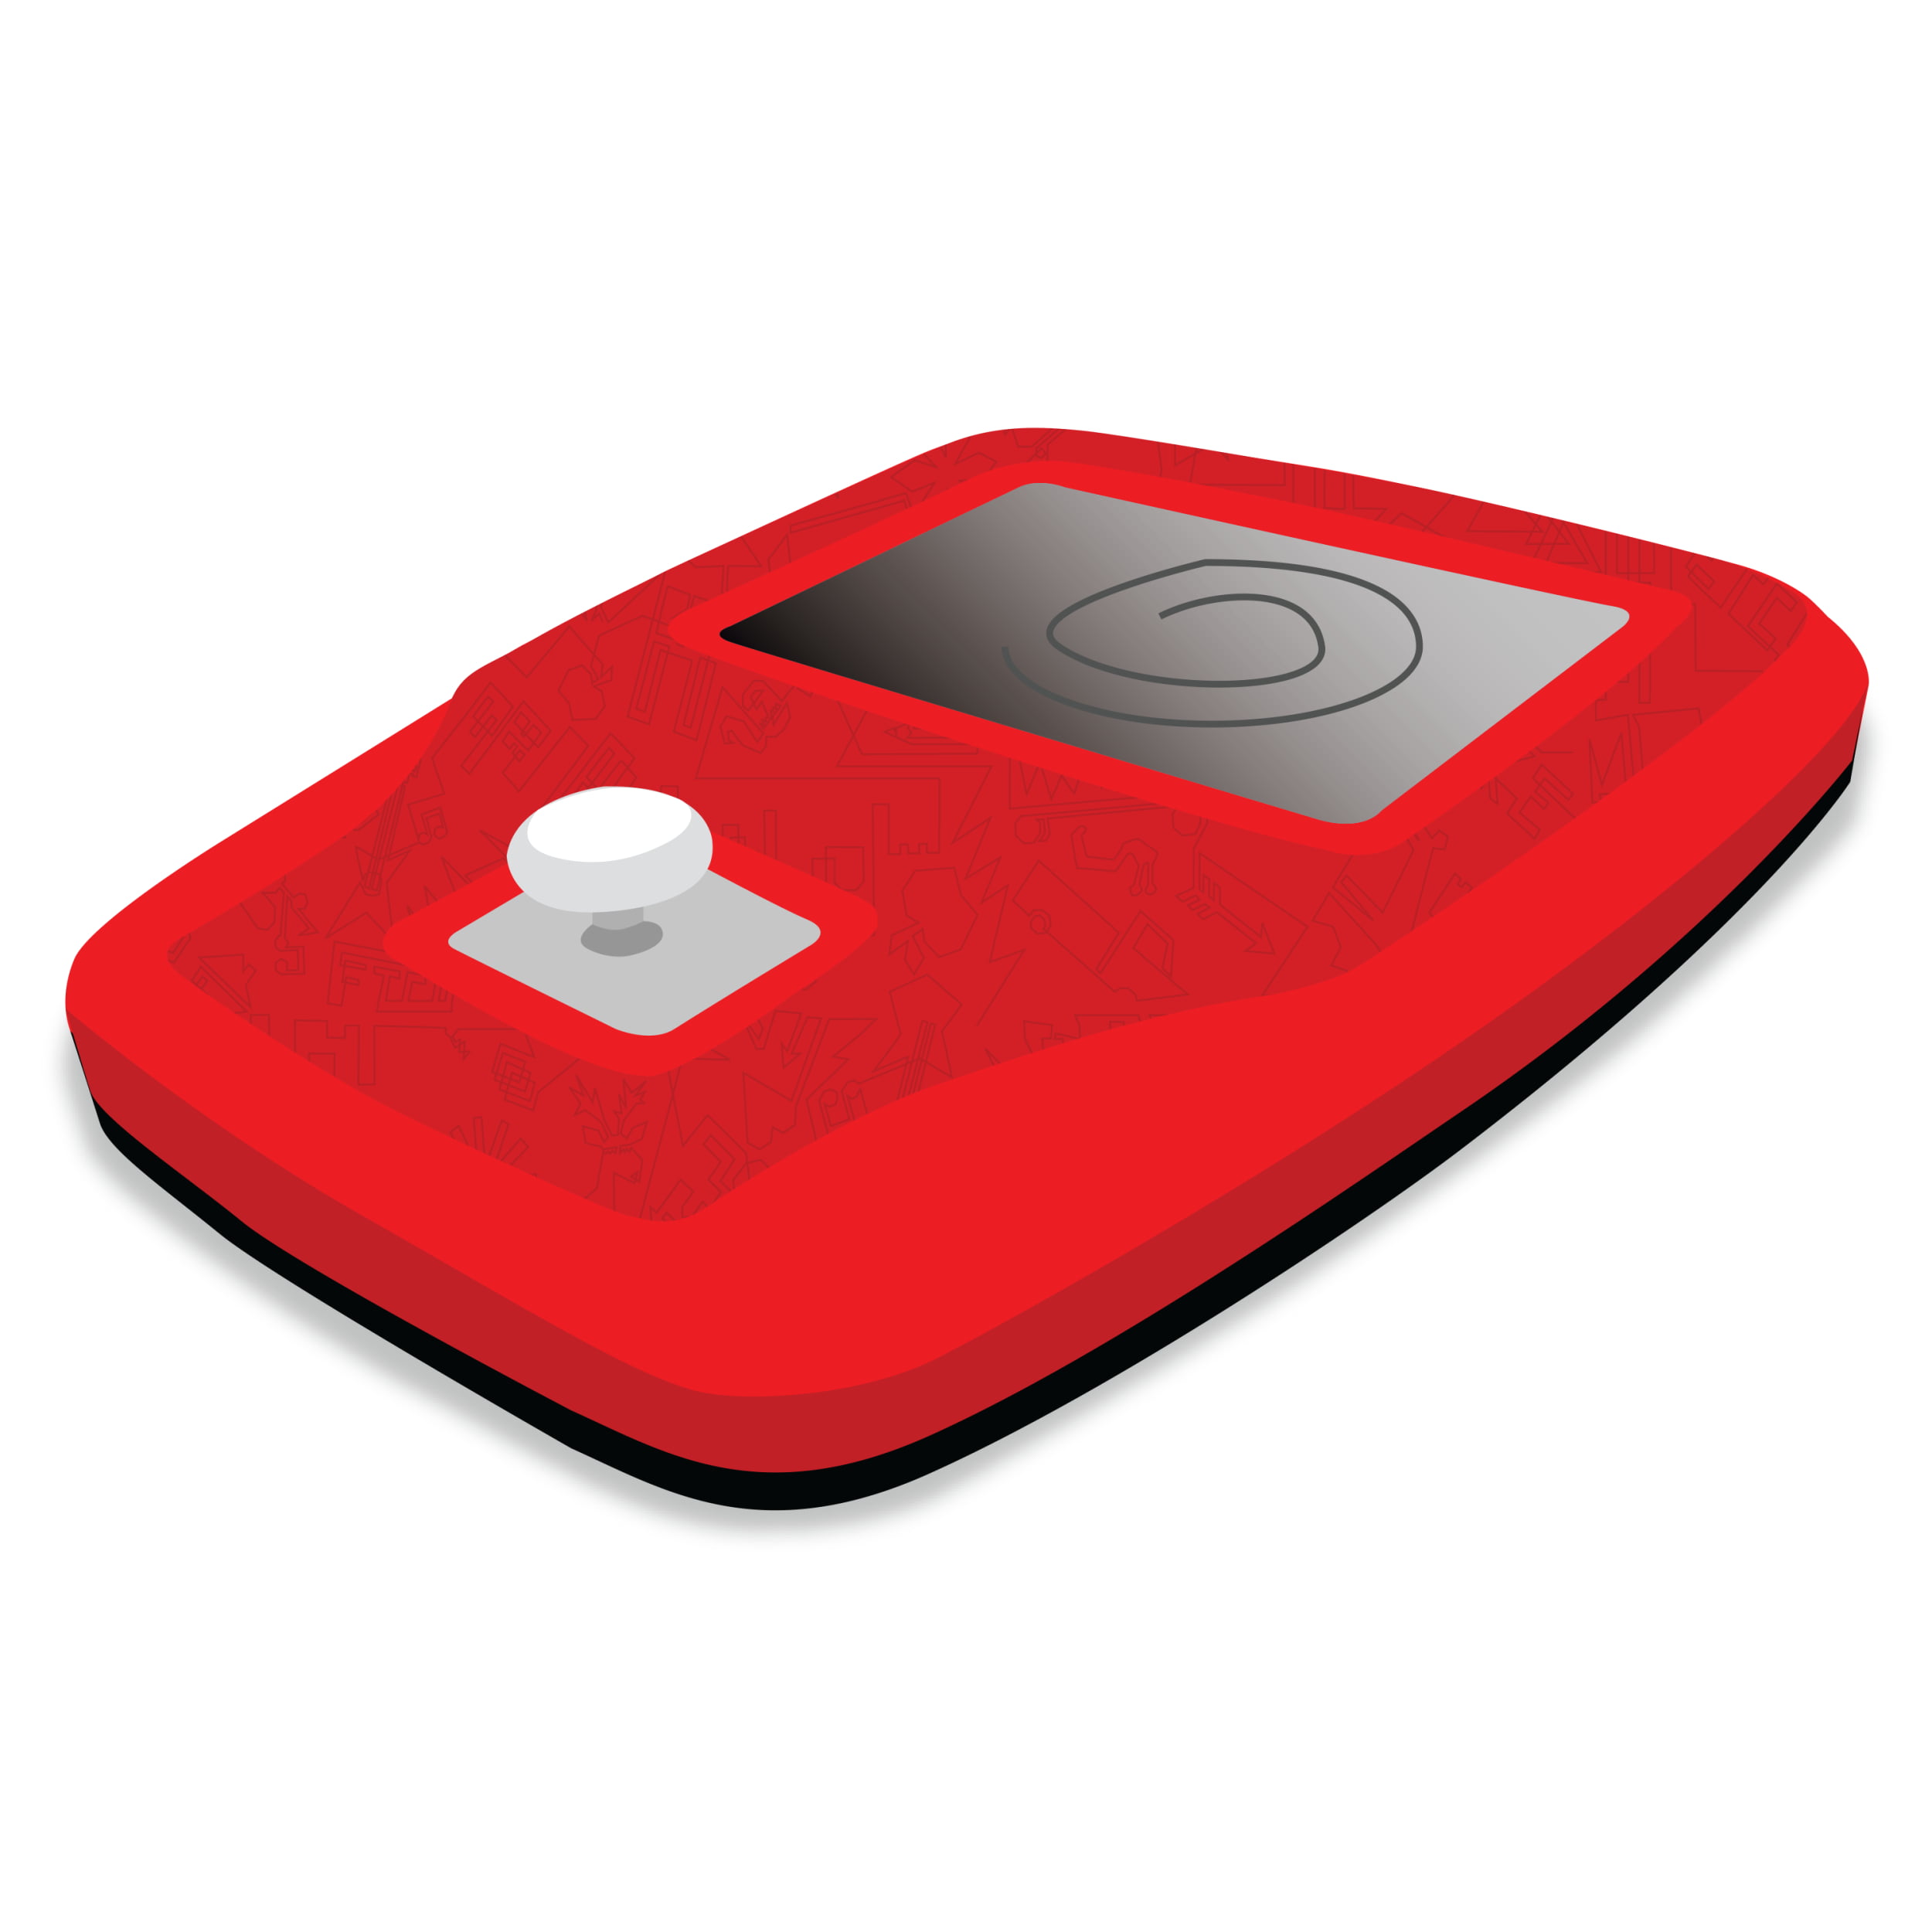 Etch A Sketch Jr. Joystick Easily Draw Lines Loops and Circles